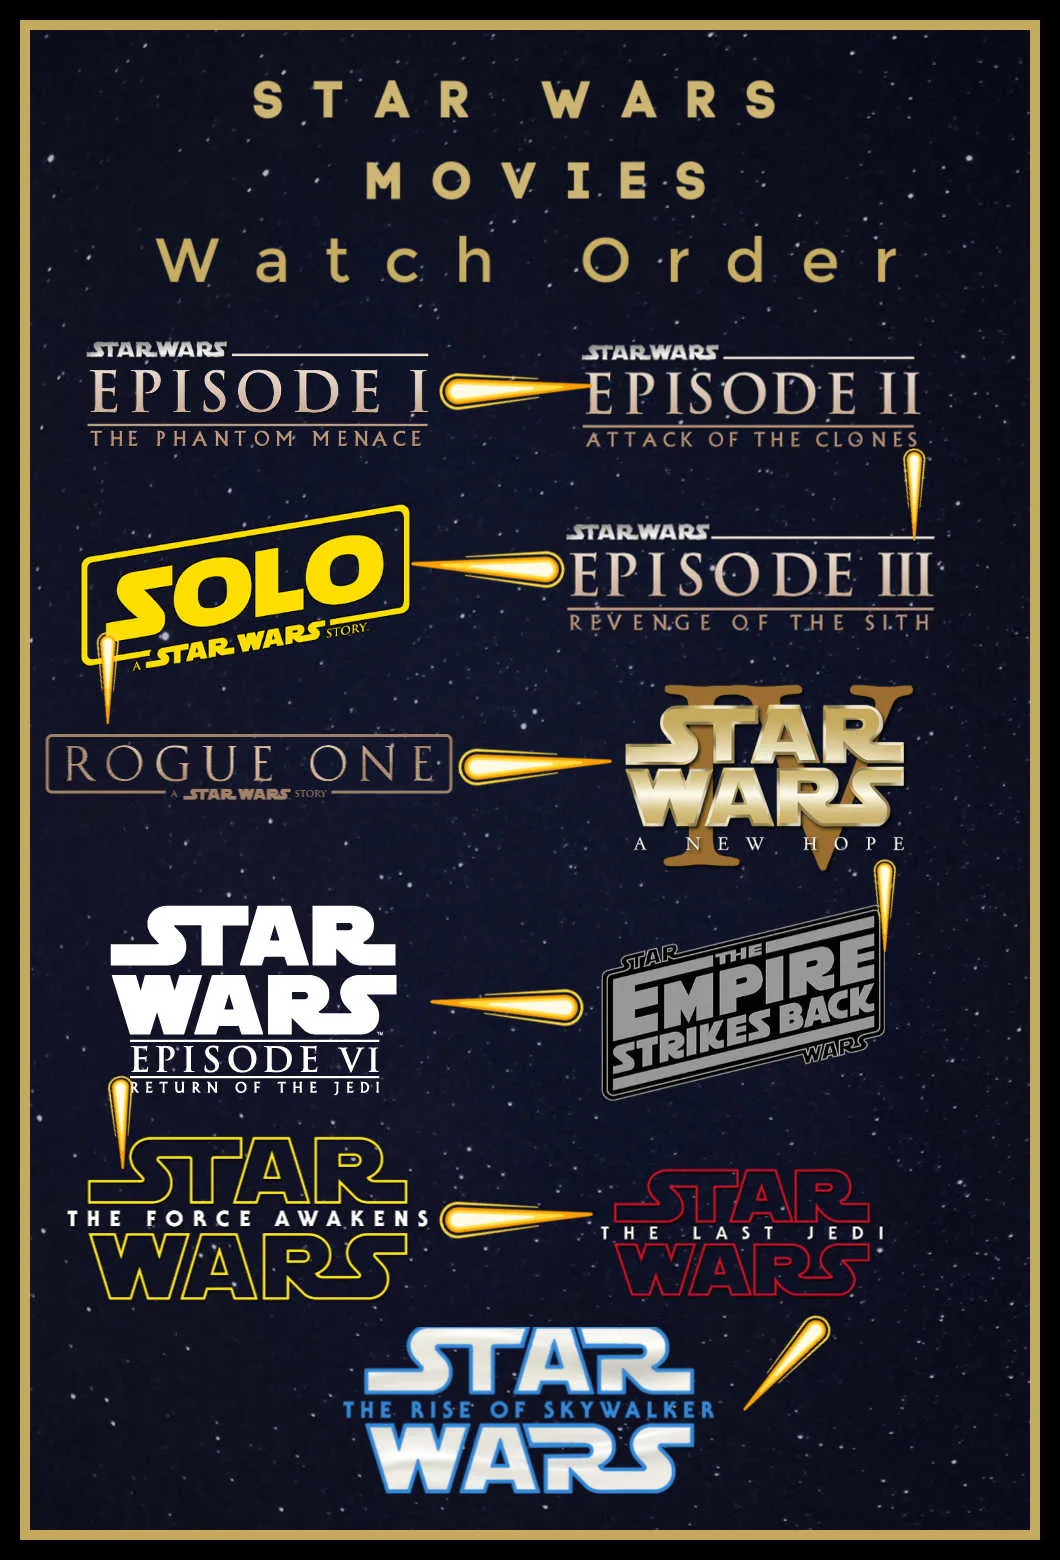 In what order should I watch the Star Wars movies?